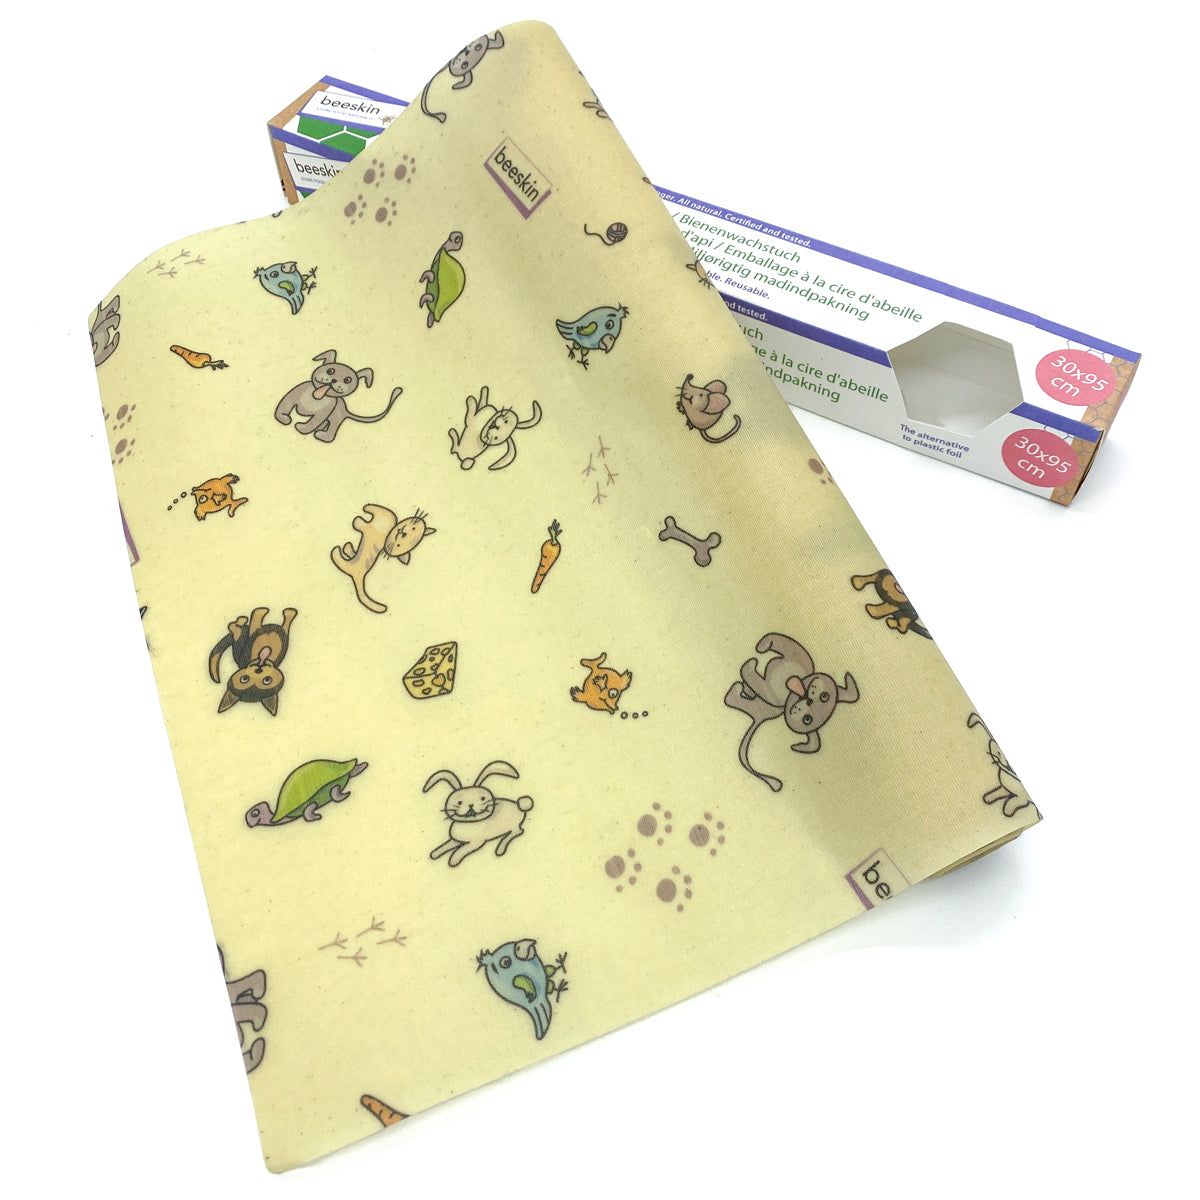 beeswax roll with pets printed on it next to package